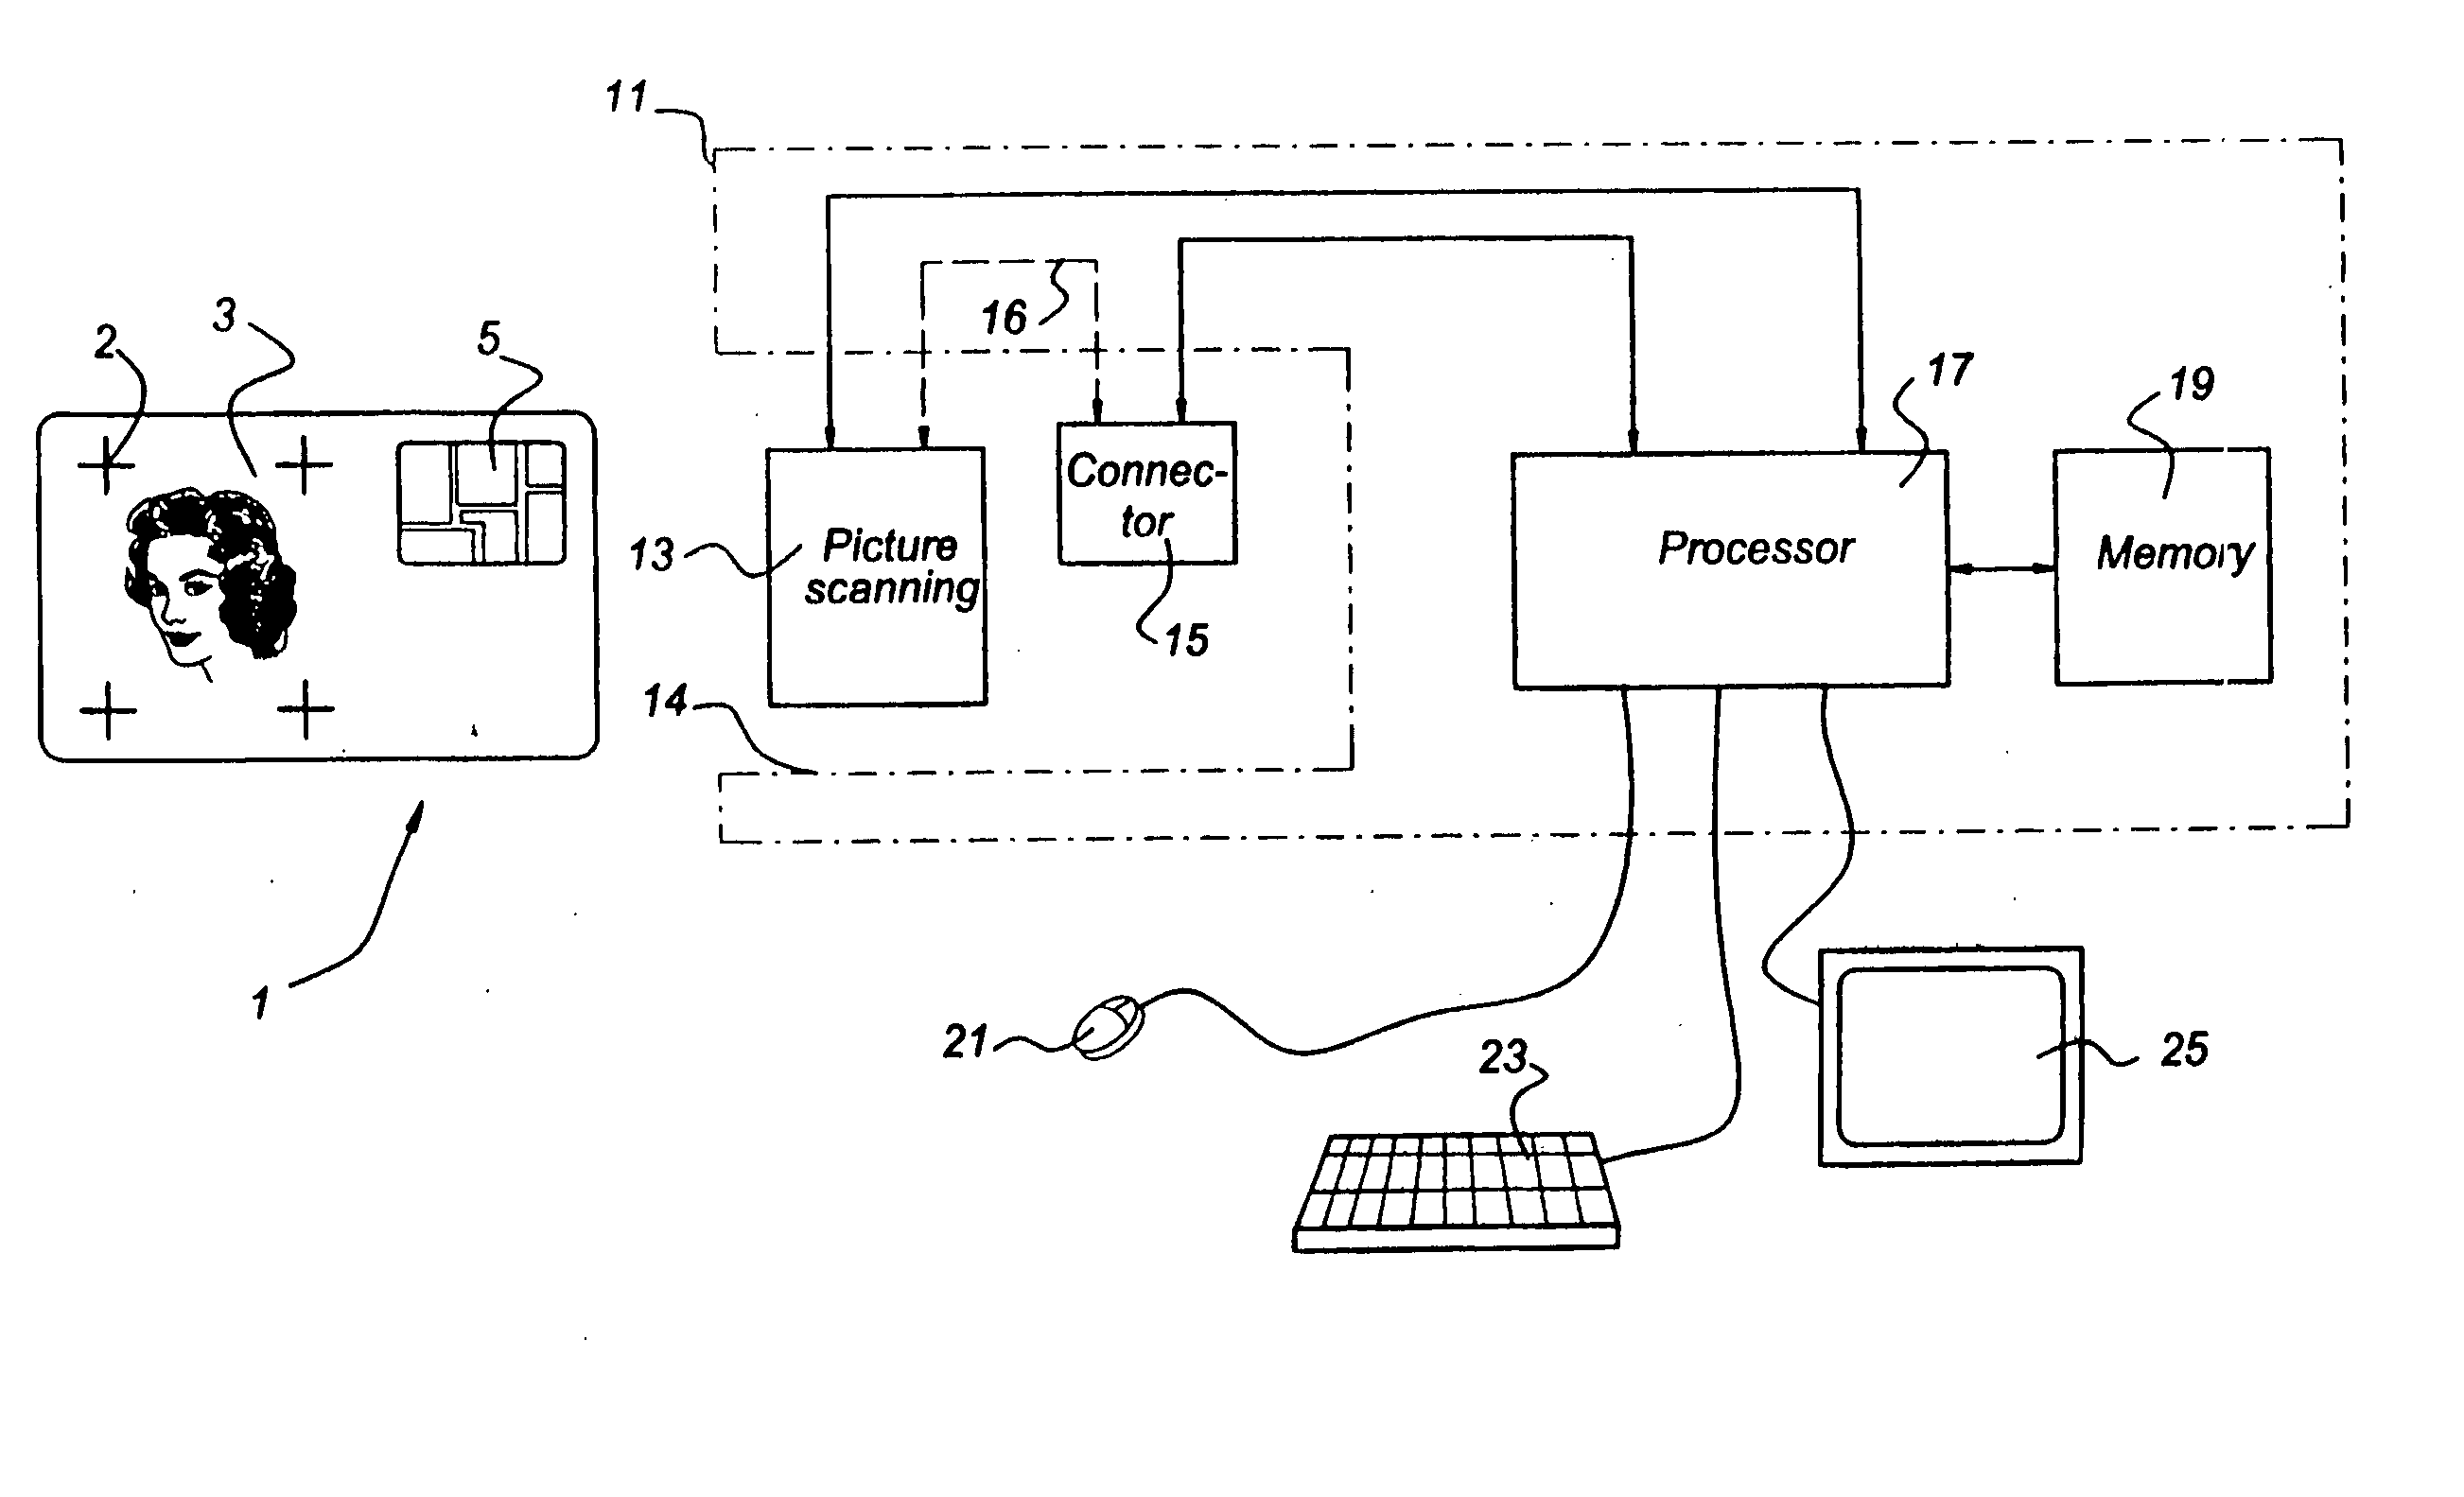 Secure photo carrying identification device, as well as means and method for authenticating such an identification device